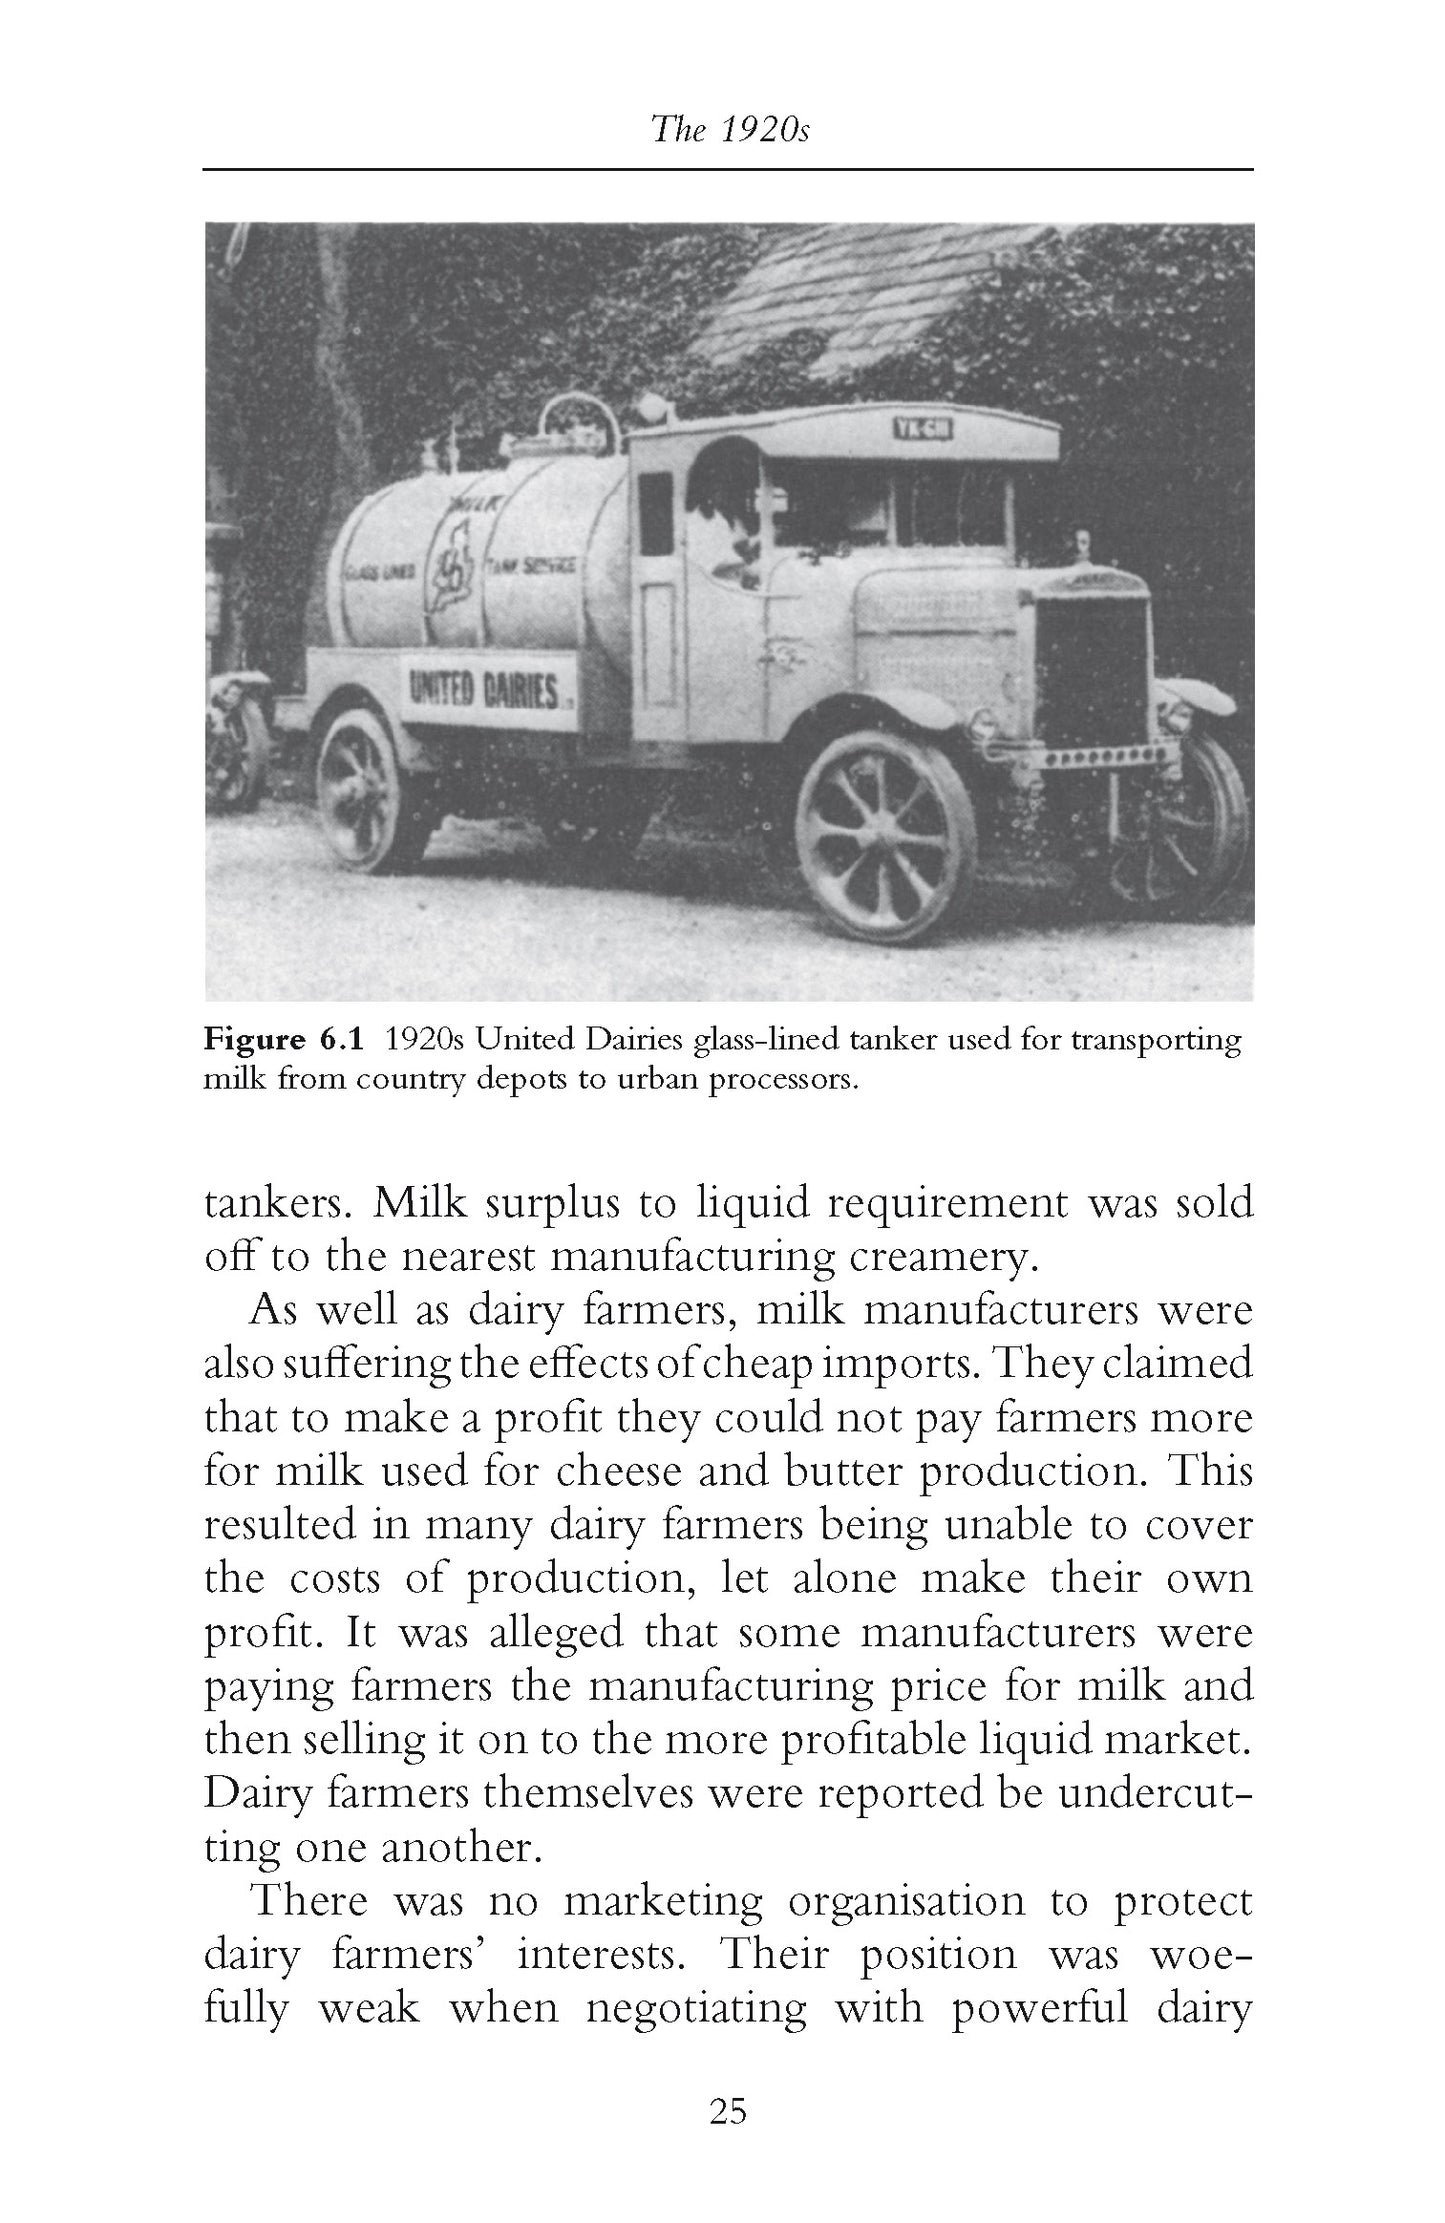 Brief History of Milk Production, A: From Farm to Market